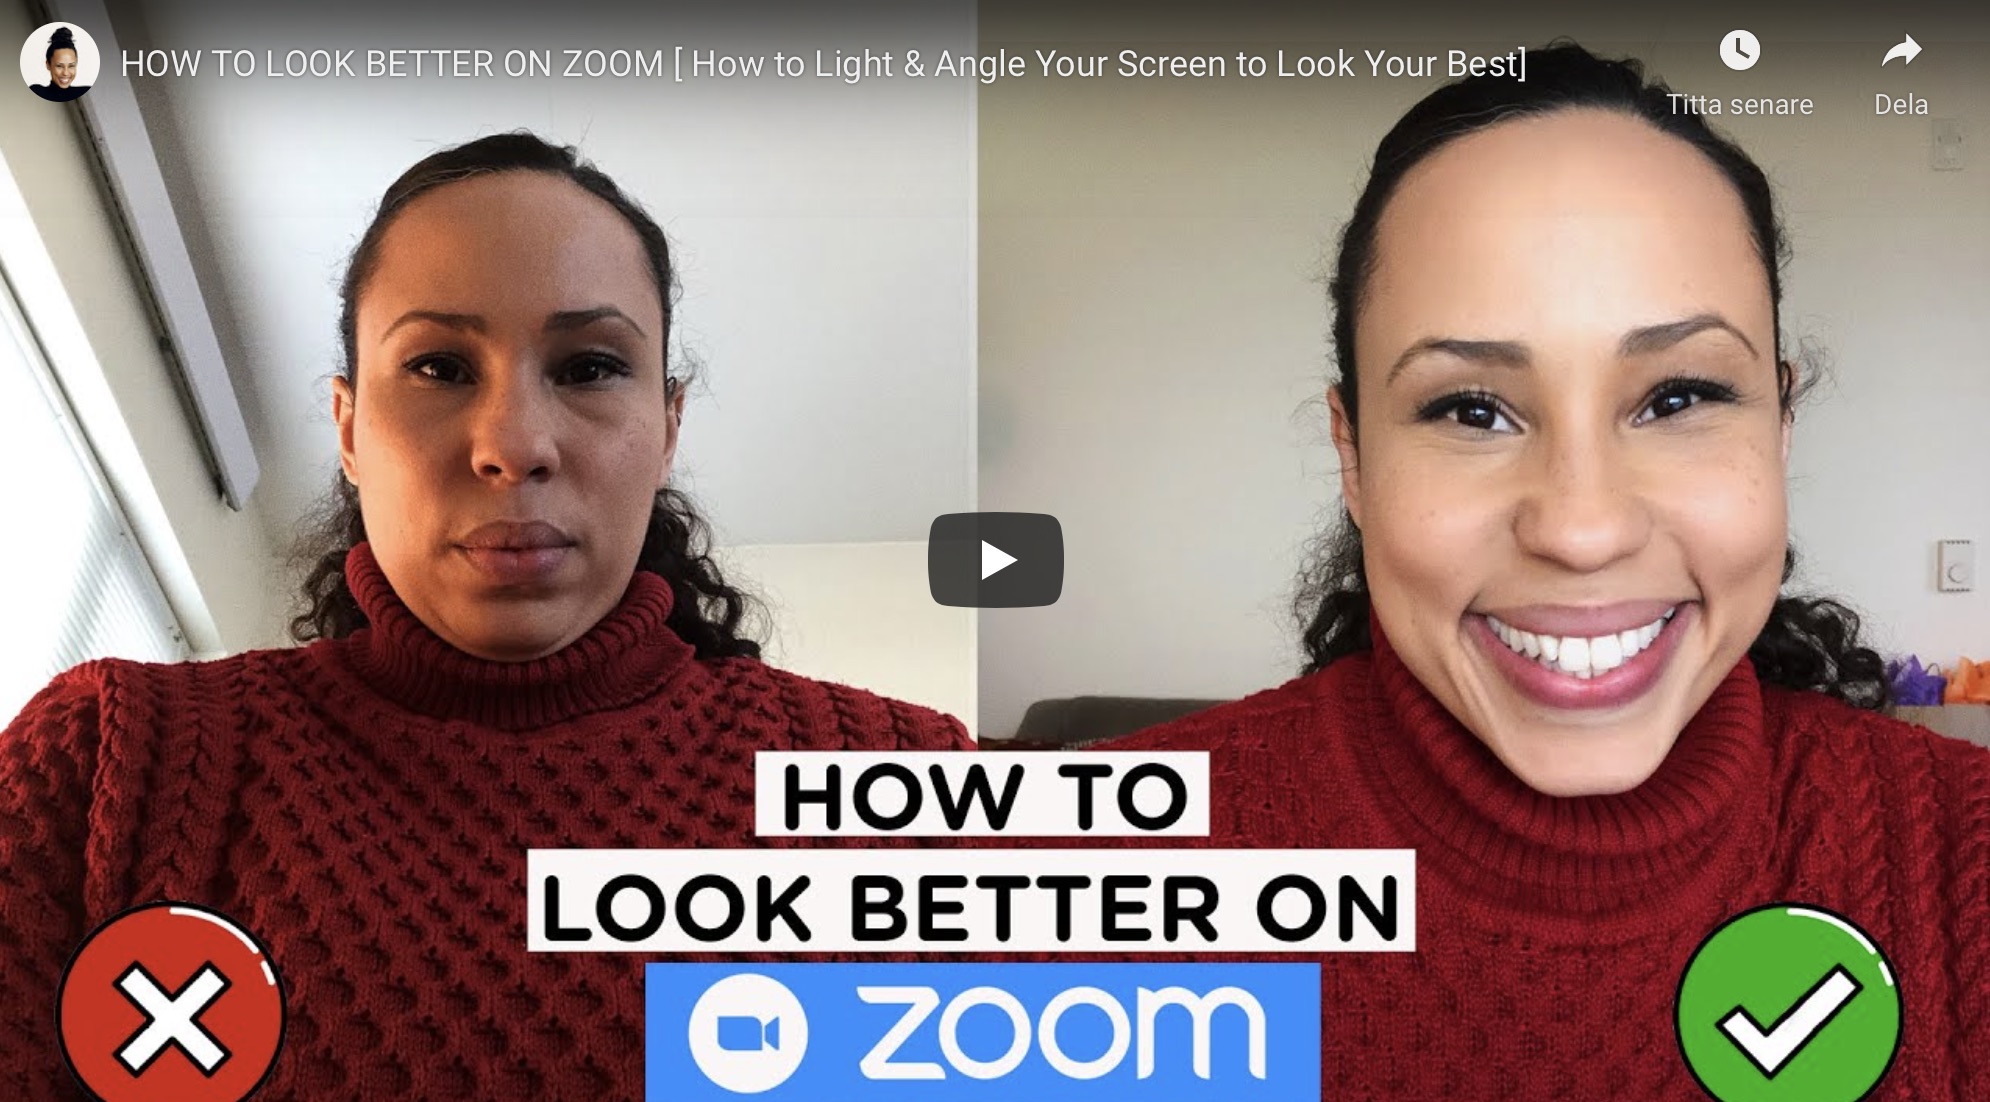 How to look better on Zoom (or Teams)